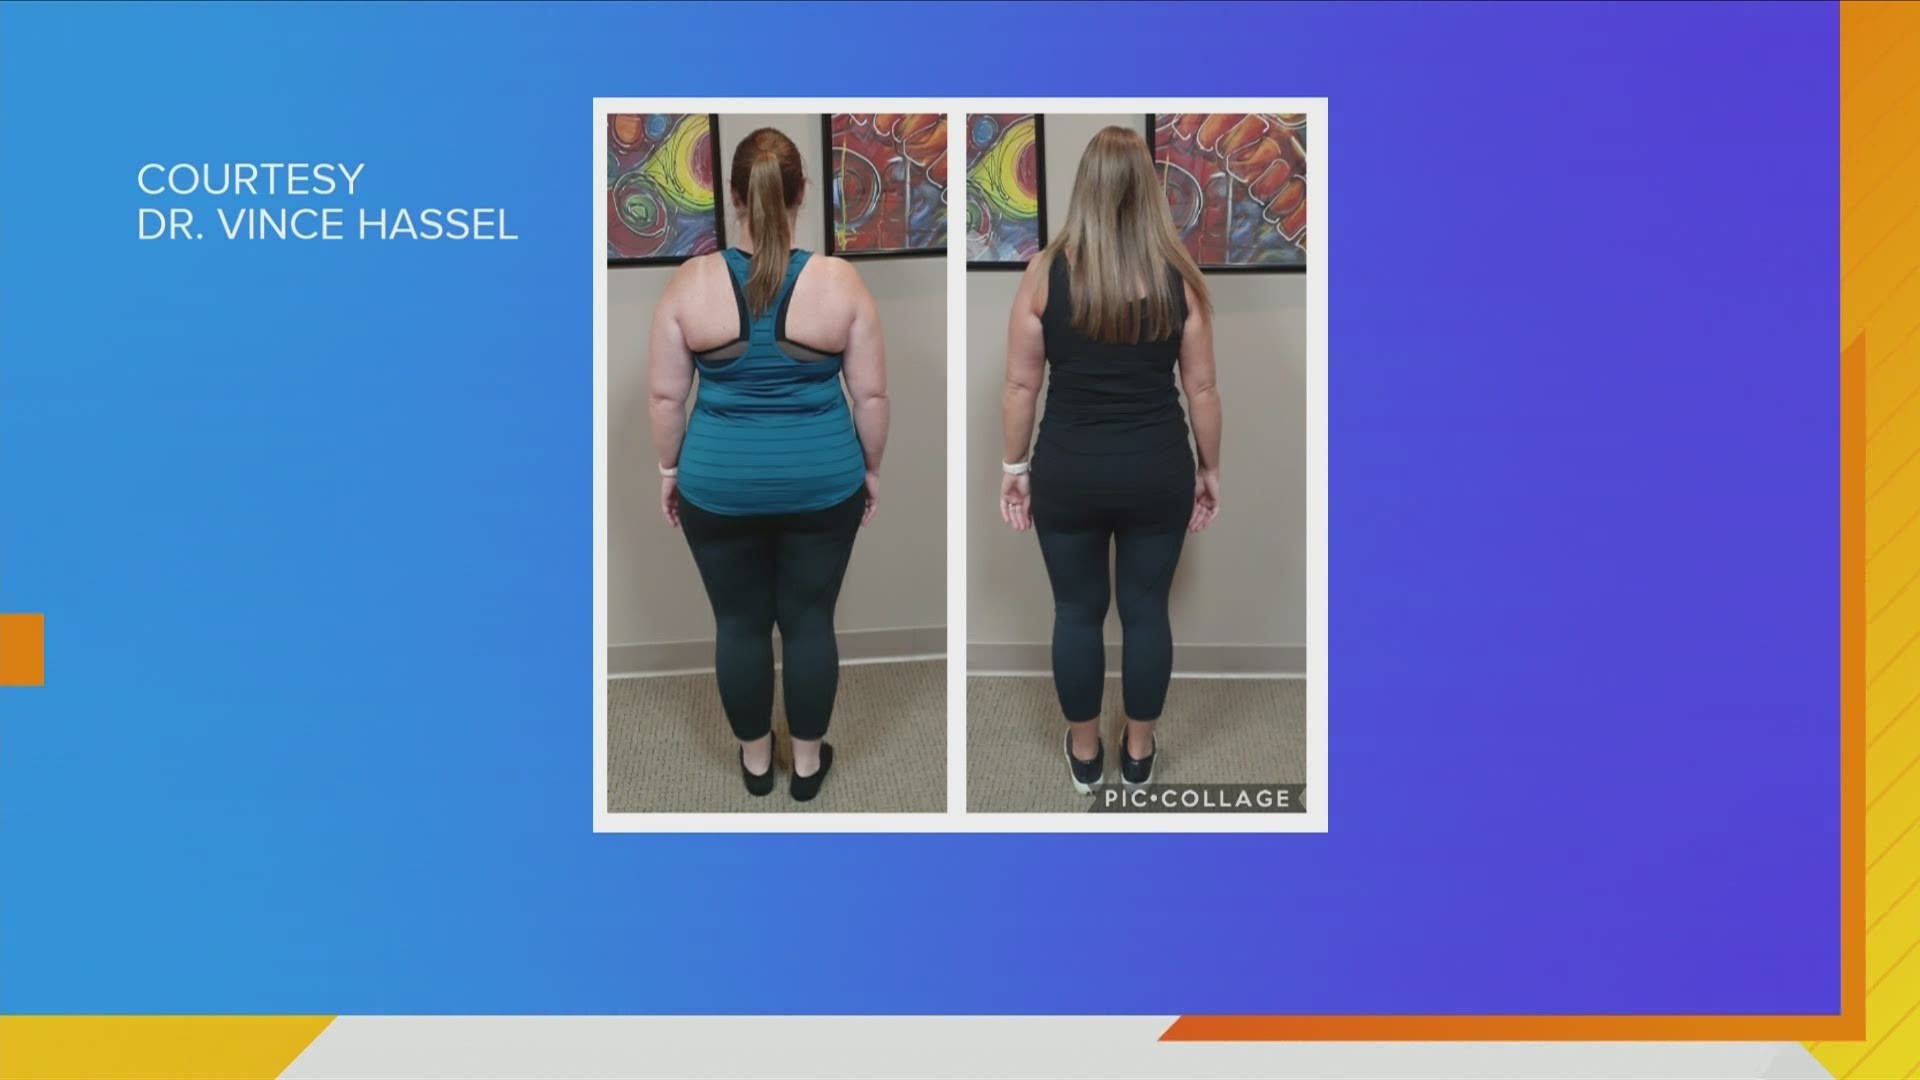 Dr. Vince Hassel helped Billie Rogers lose 36 pounds since starting his program. Billie is a "schedule" person and liked the way it fit her lifestyle | PAID CONTENT